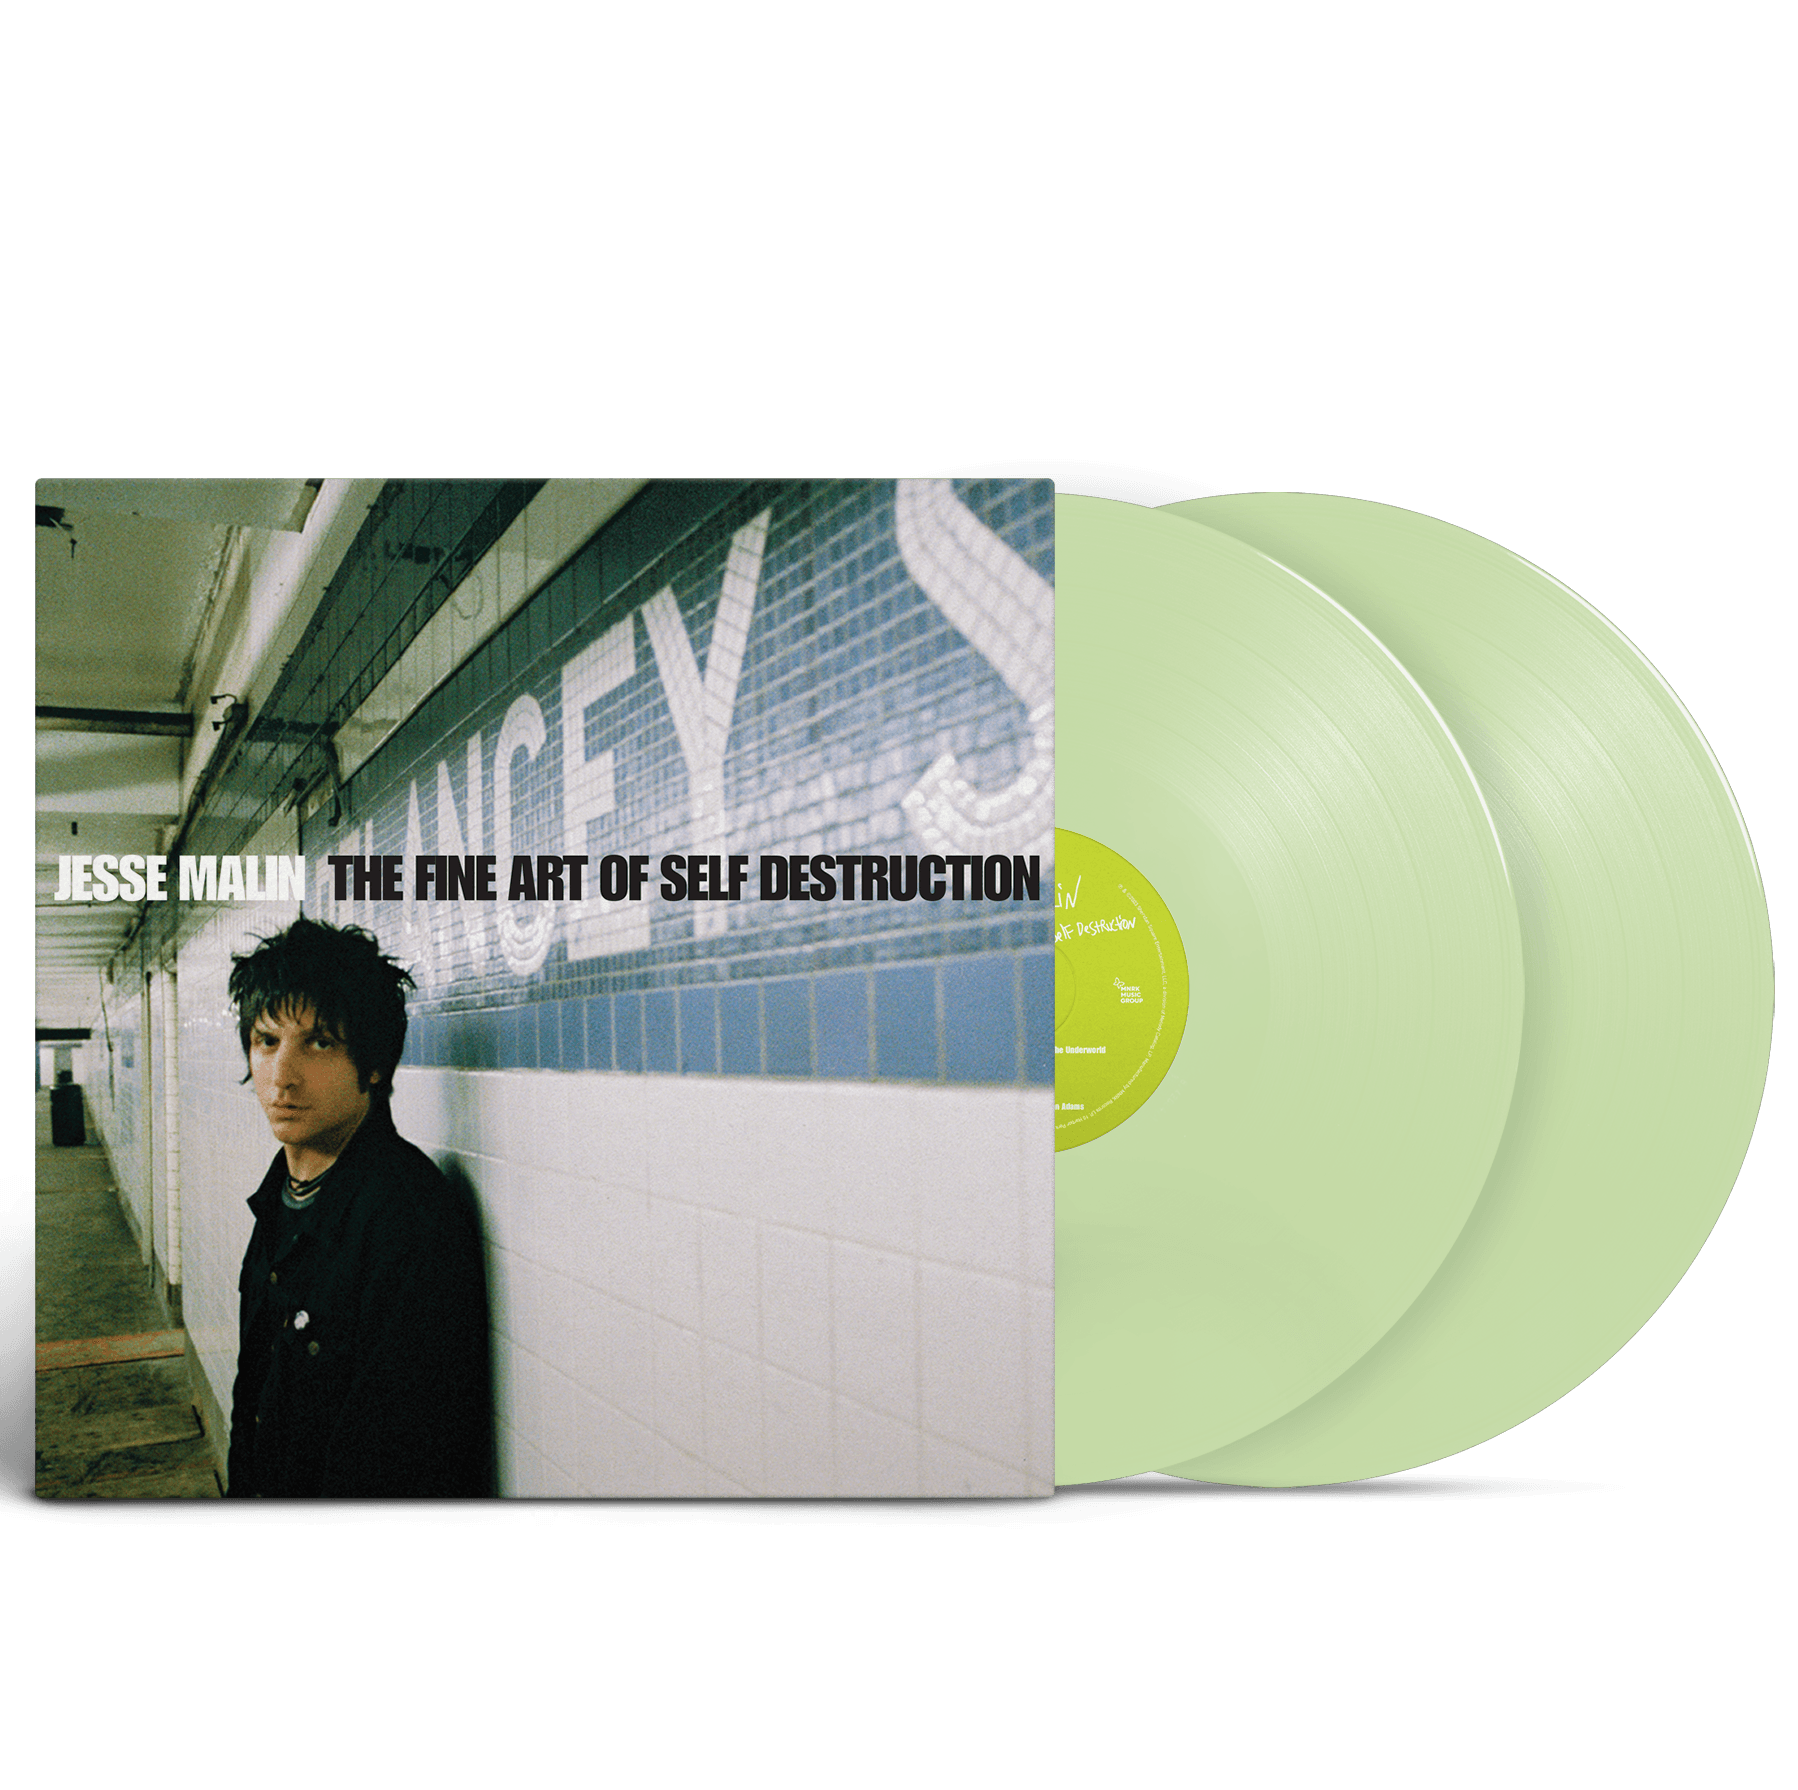 JESSE MALIN 20TH ANNIVERSARY EXPANDED REISSUE OF THE FINE ART OF SELF DESTRUCTION OUT TODAY - MNRK Heavy